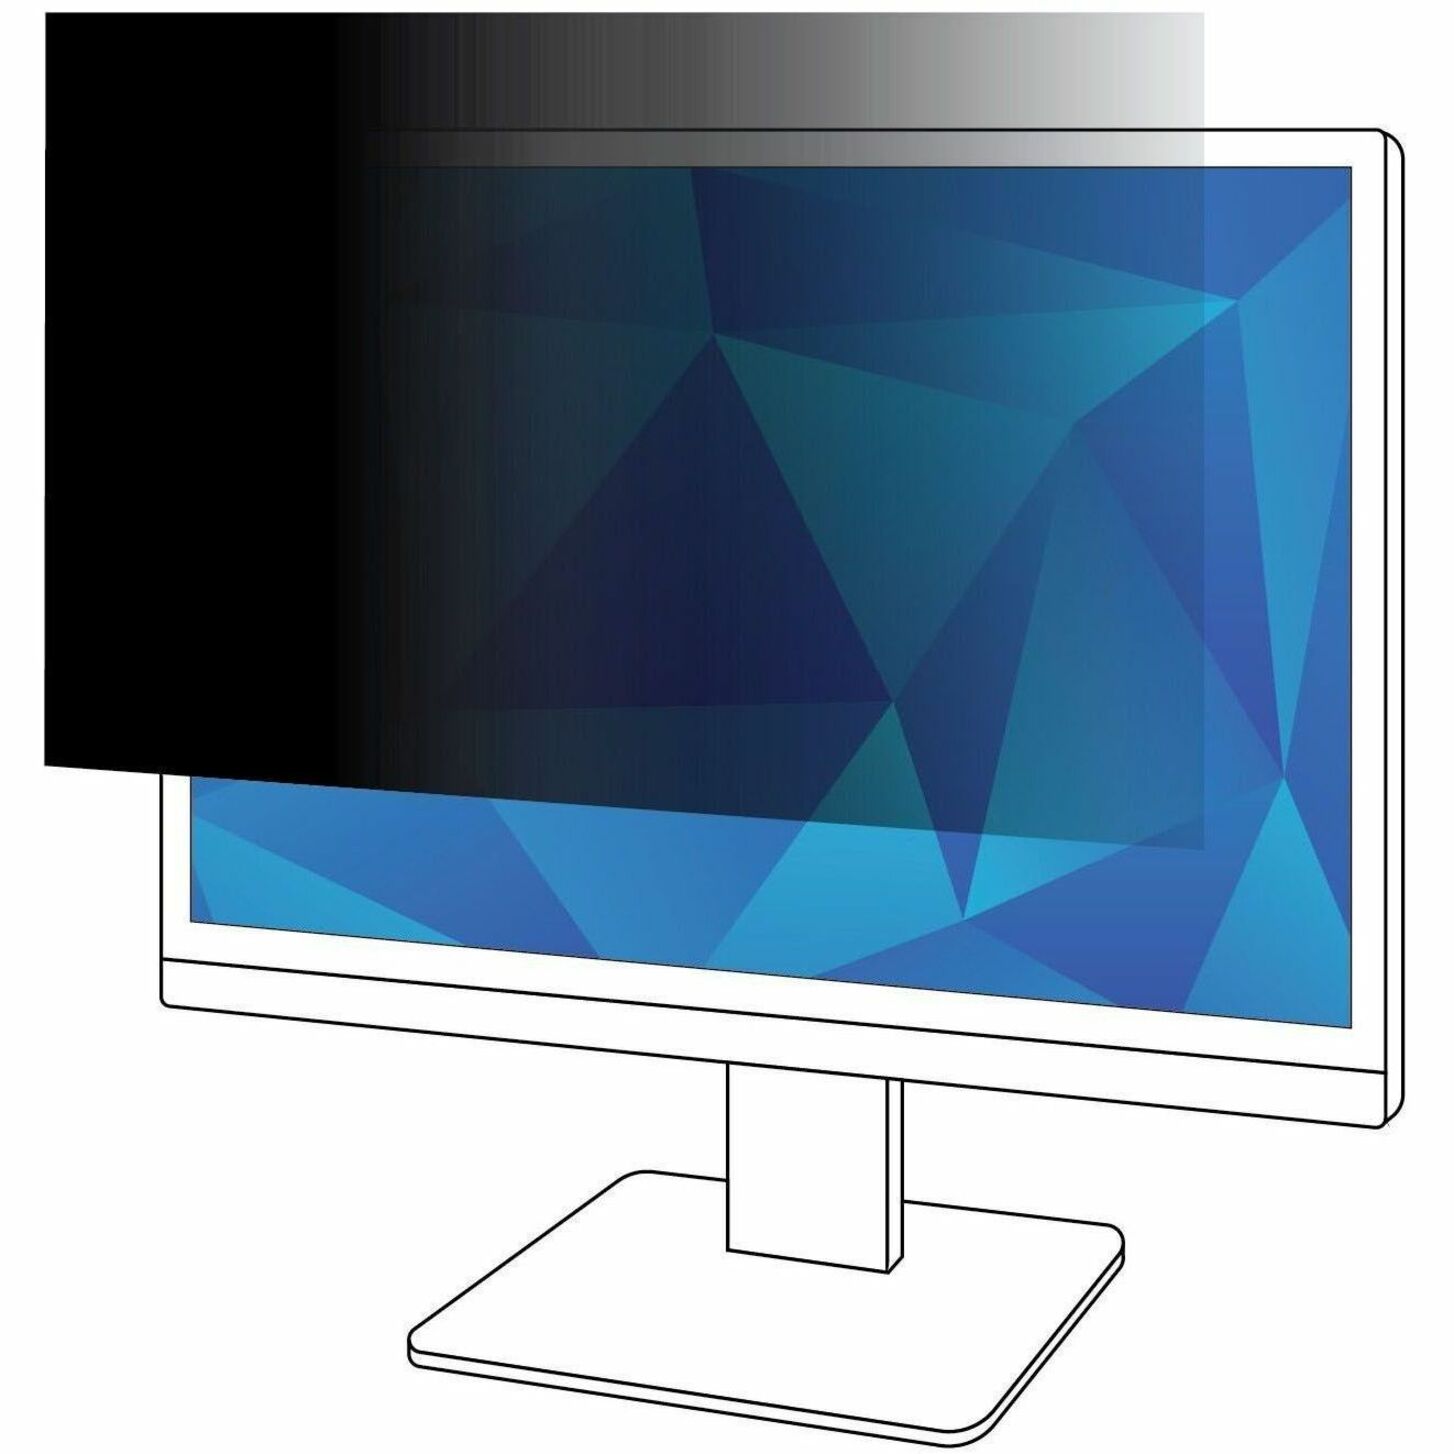 3M PF238W9B Privacy Filter for 23.8" Wide-screen Monitors, 16:9, Matte Black, Easy to Apply, Easy to Remove, Privacy